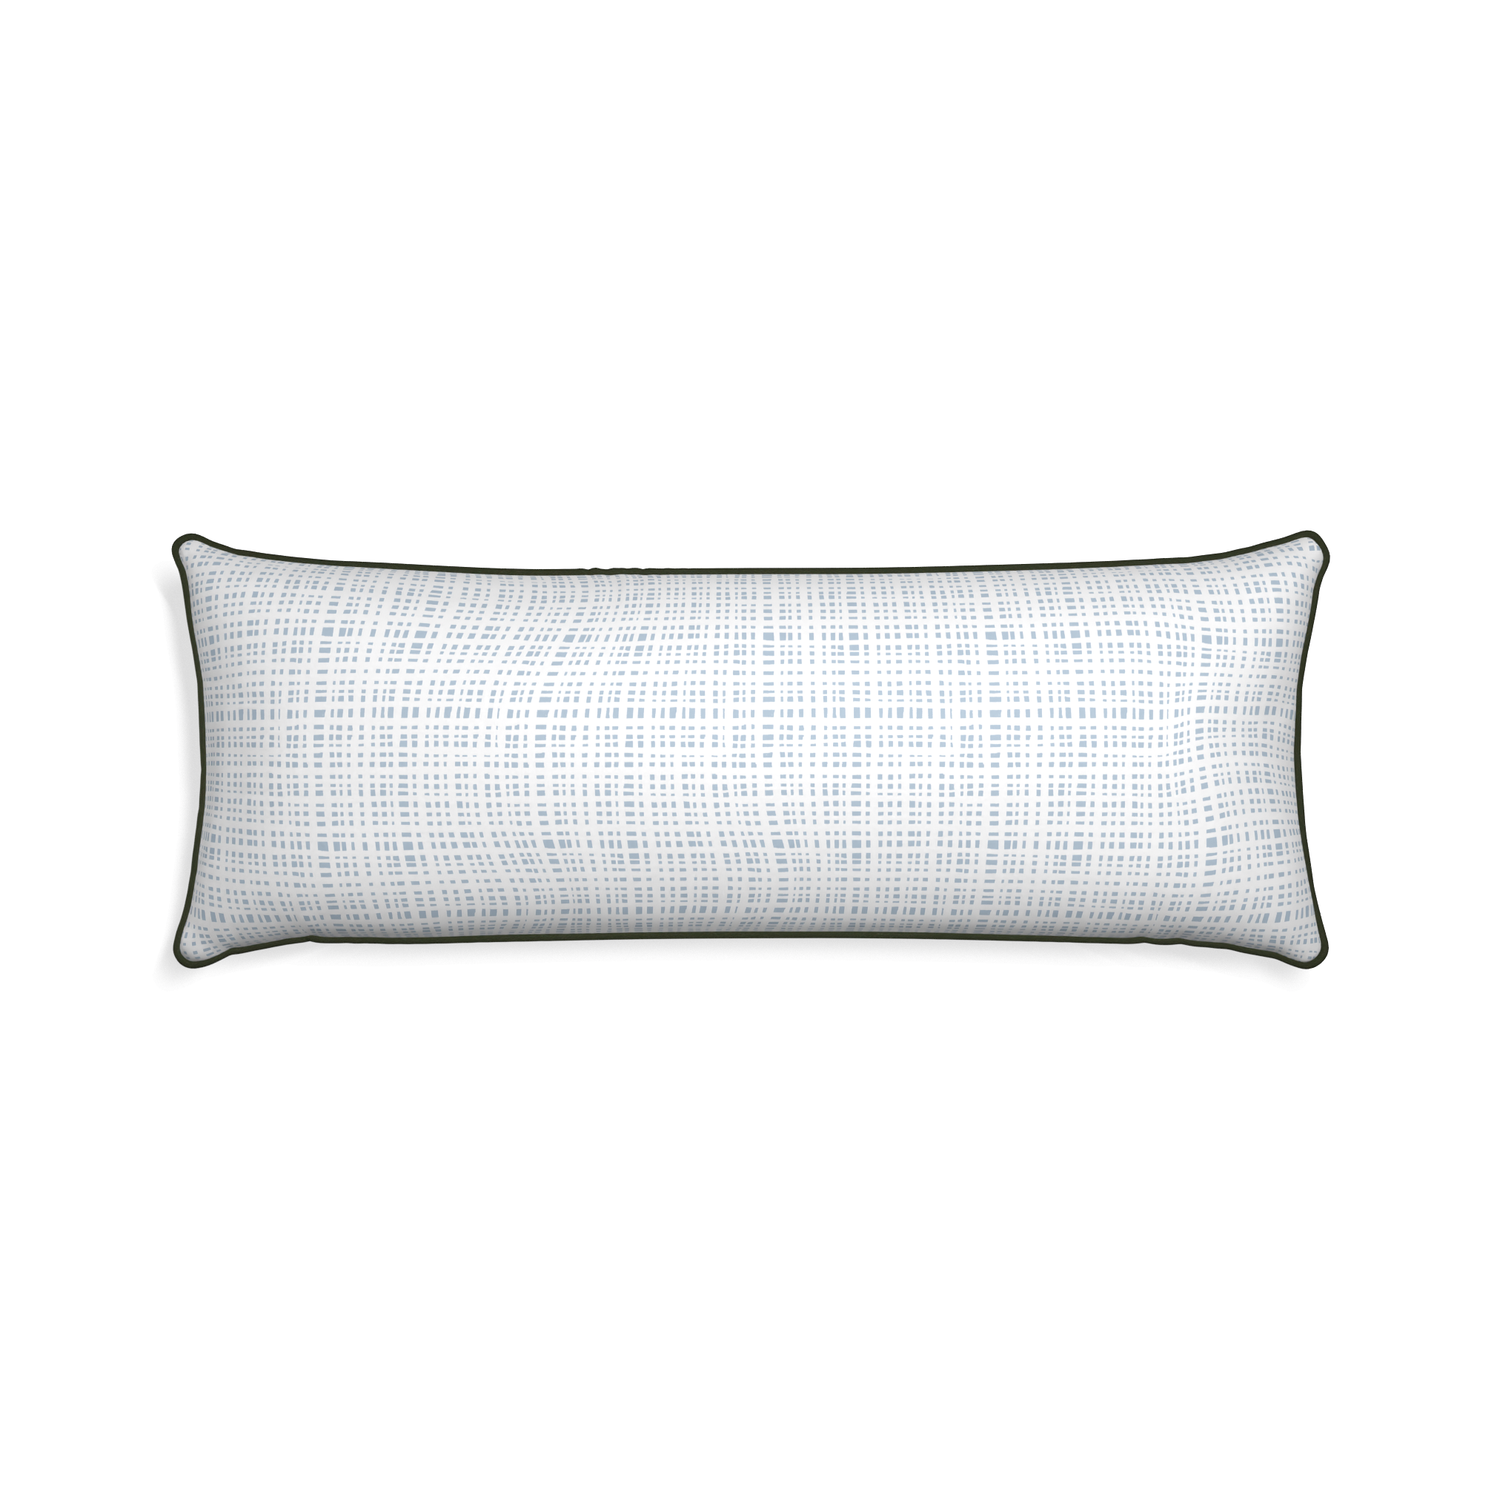 Xl-lumbar ginger custom plaid sky bluepillow with f piping on white background